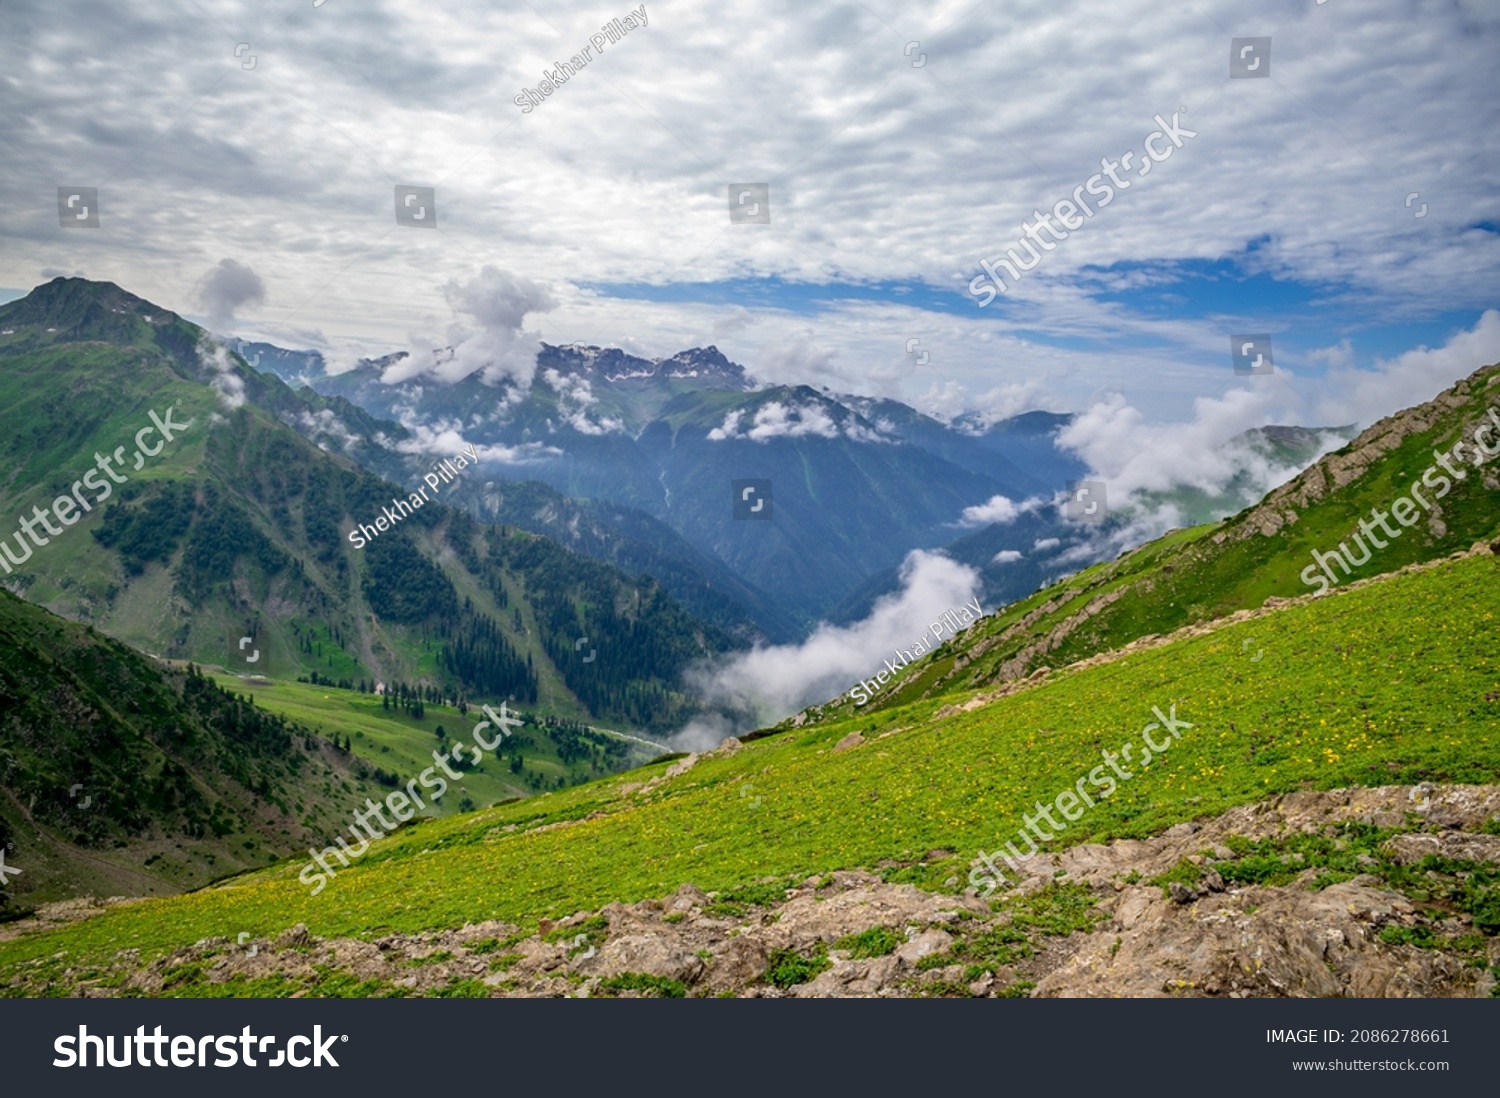 Landscape with mountains and clouds. Panoramic view of Kashmir valley in the Himalayan region. Serene meadows alpine trees, wildflowers on the trails Kashmir Great Lakes Trek, Sep .2021 India . #2086278661